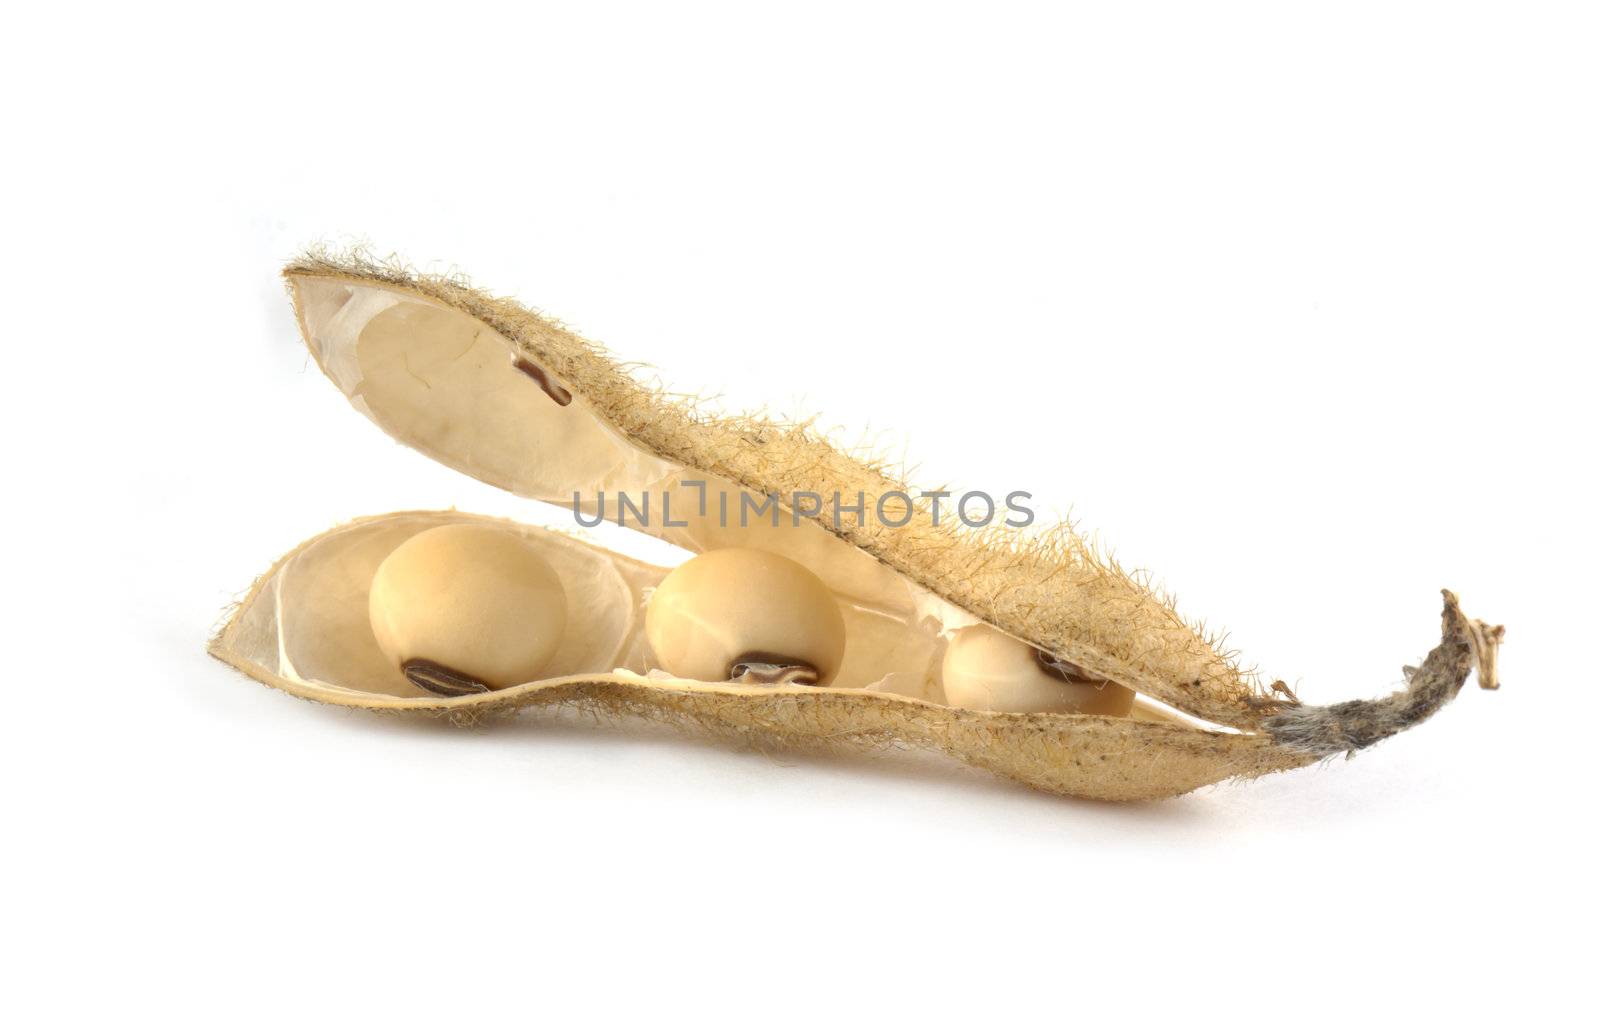 Soy pods isolated on white background